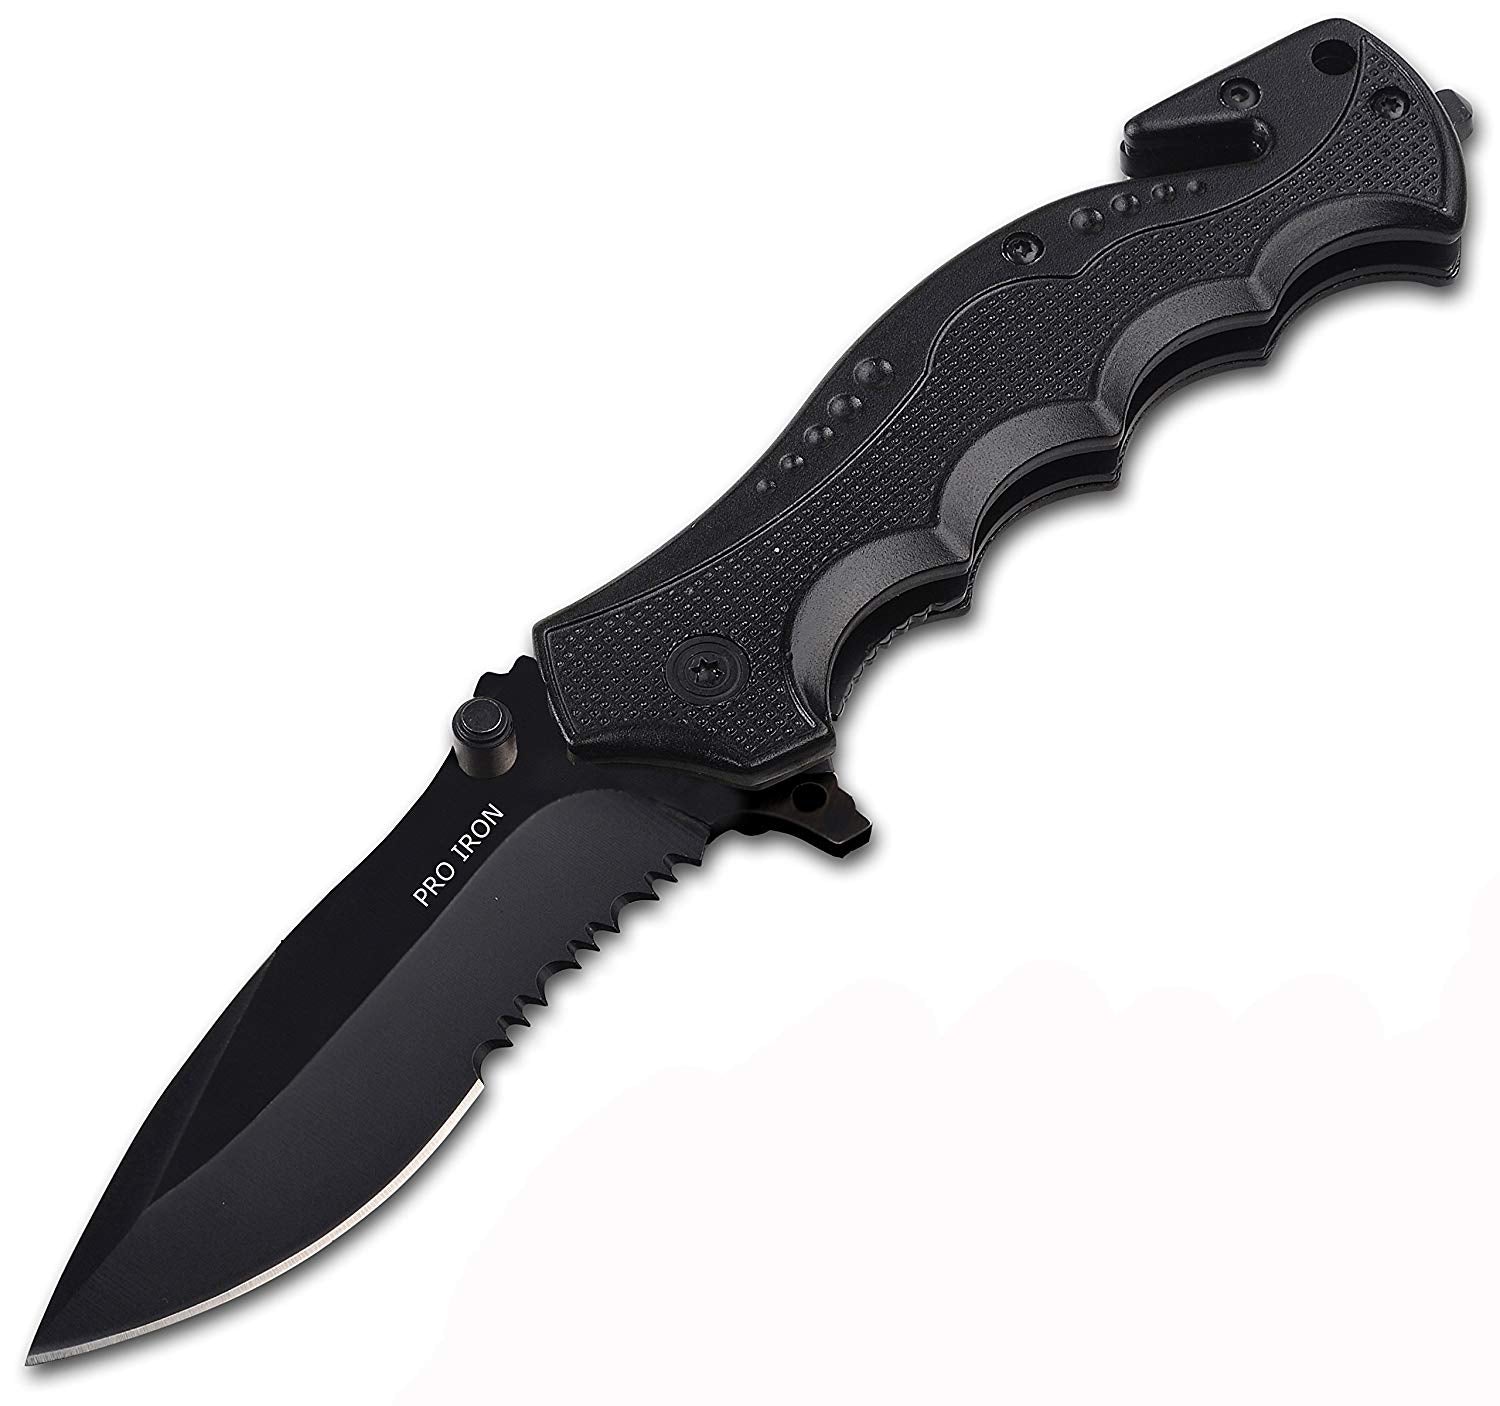 Serrated Edge Outdoor Survival Camping Hunting Knife